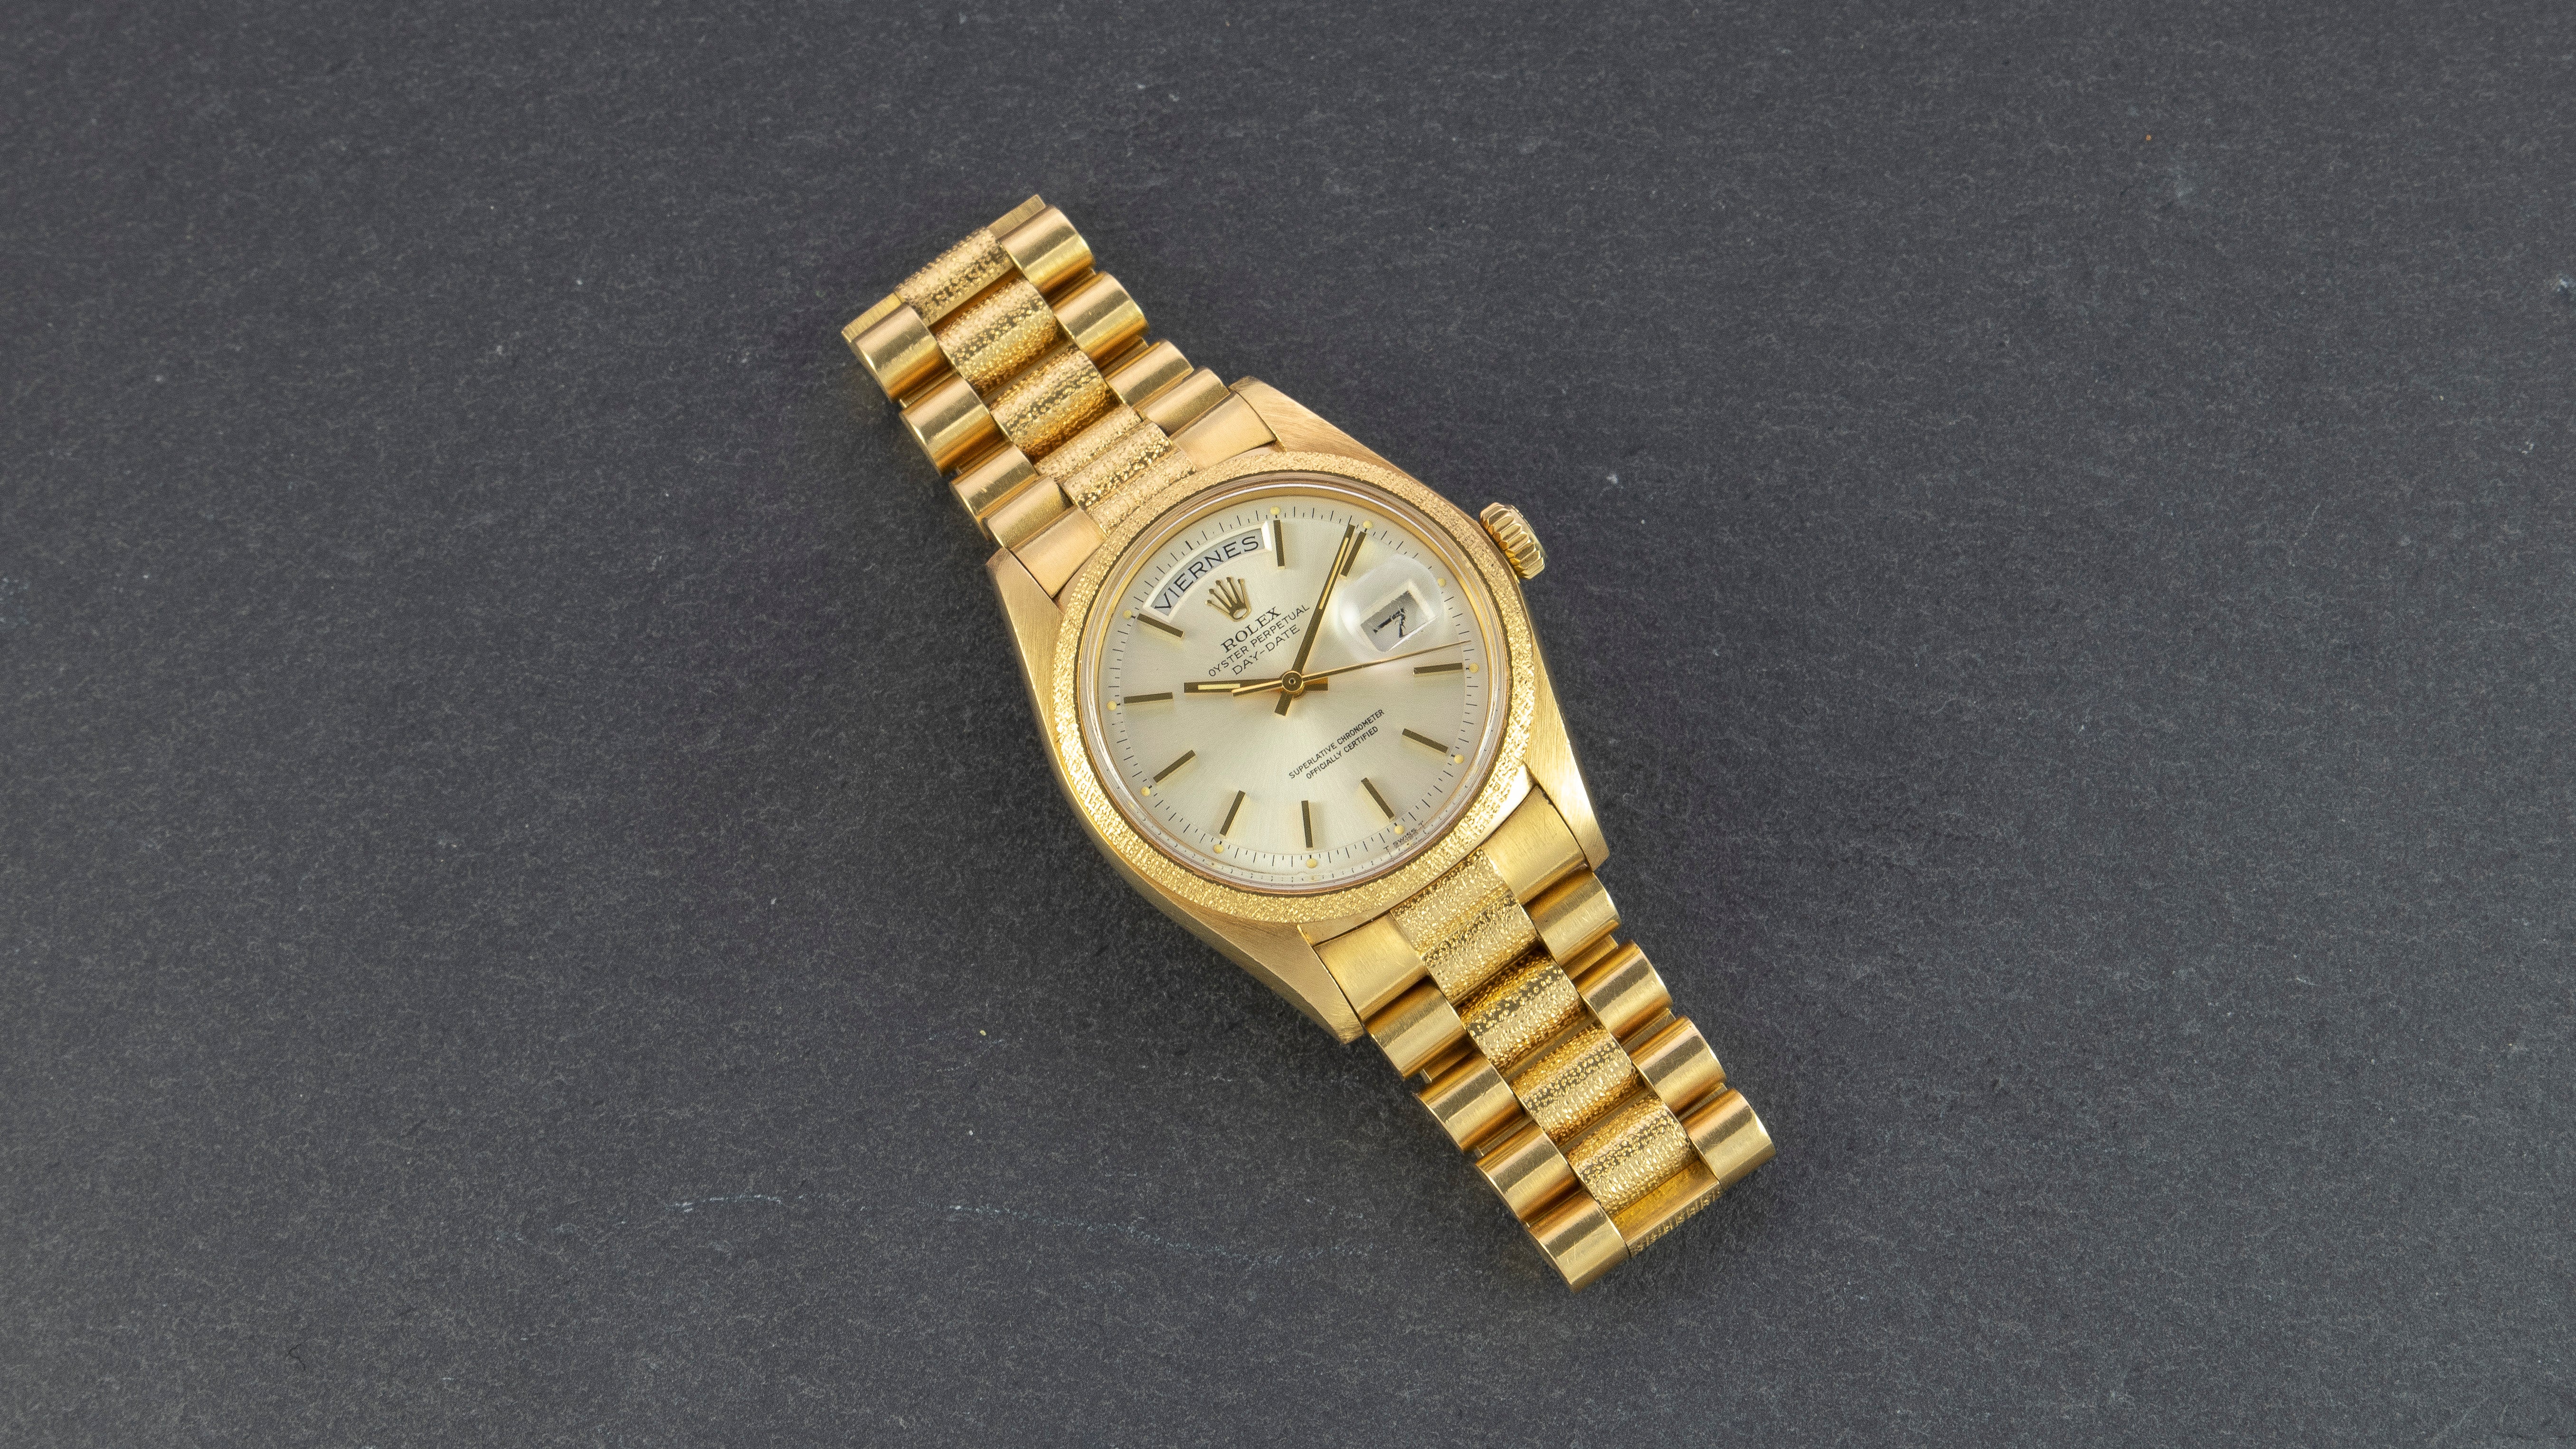 Rolex 18K Yellow Gold Day-Date President Watch with Silver Dial and Factory Morellis Finish | Veralet